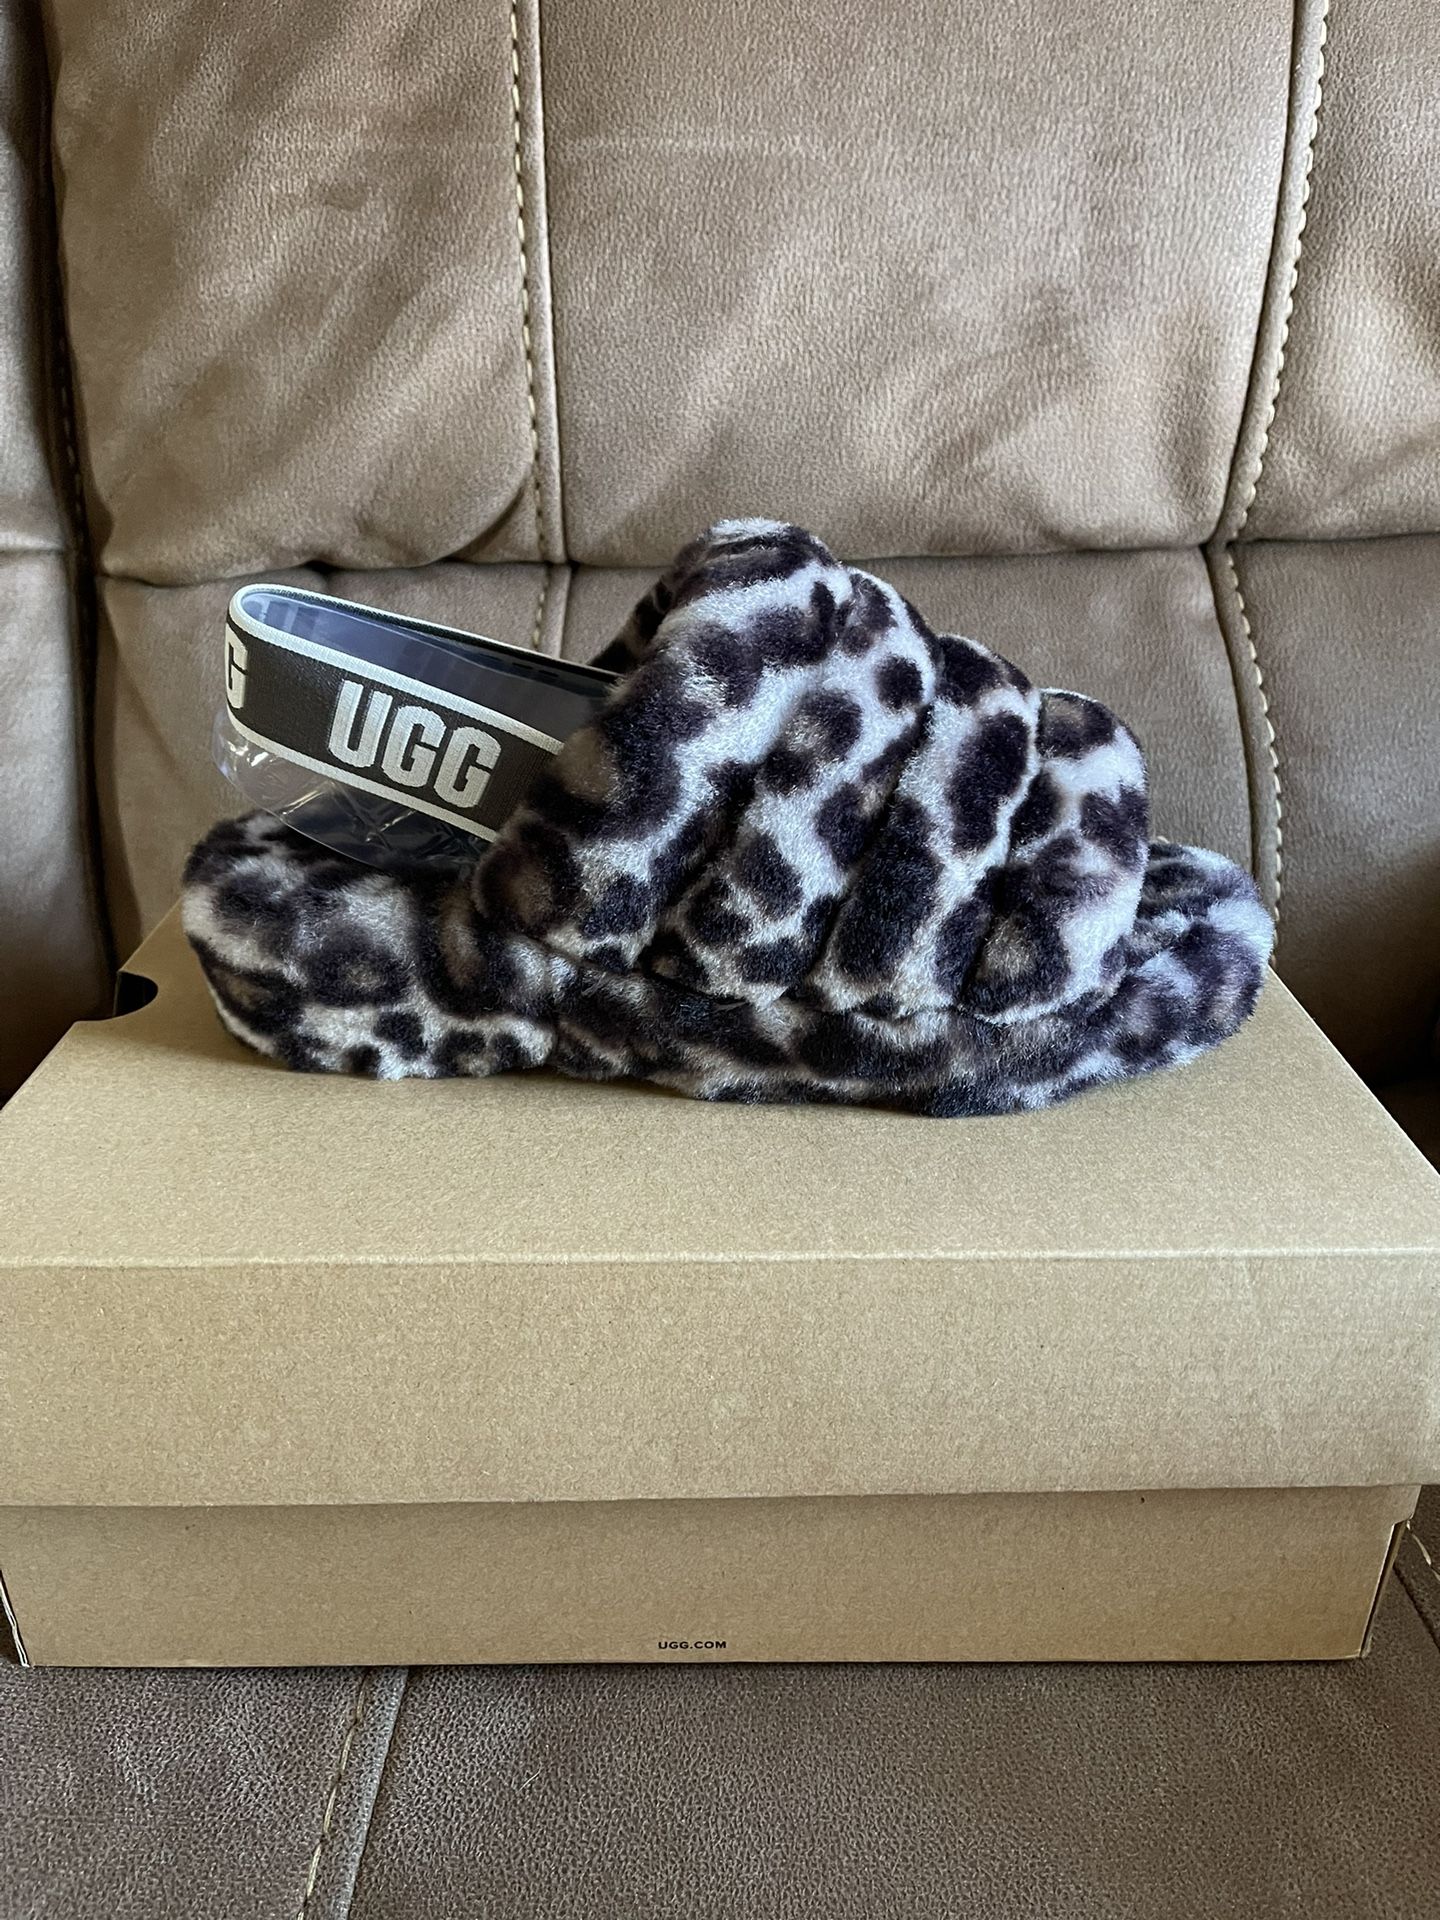 UGG Slippers Panther Print Size 8.